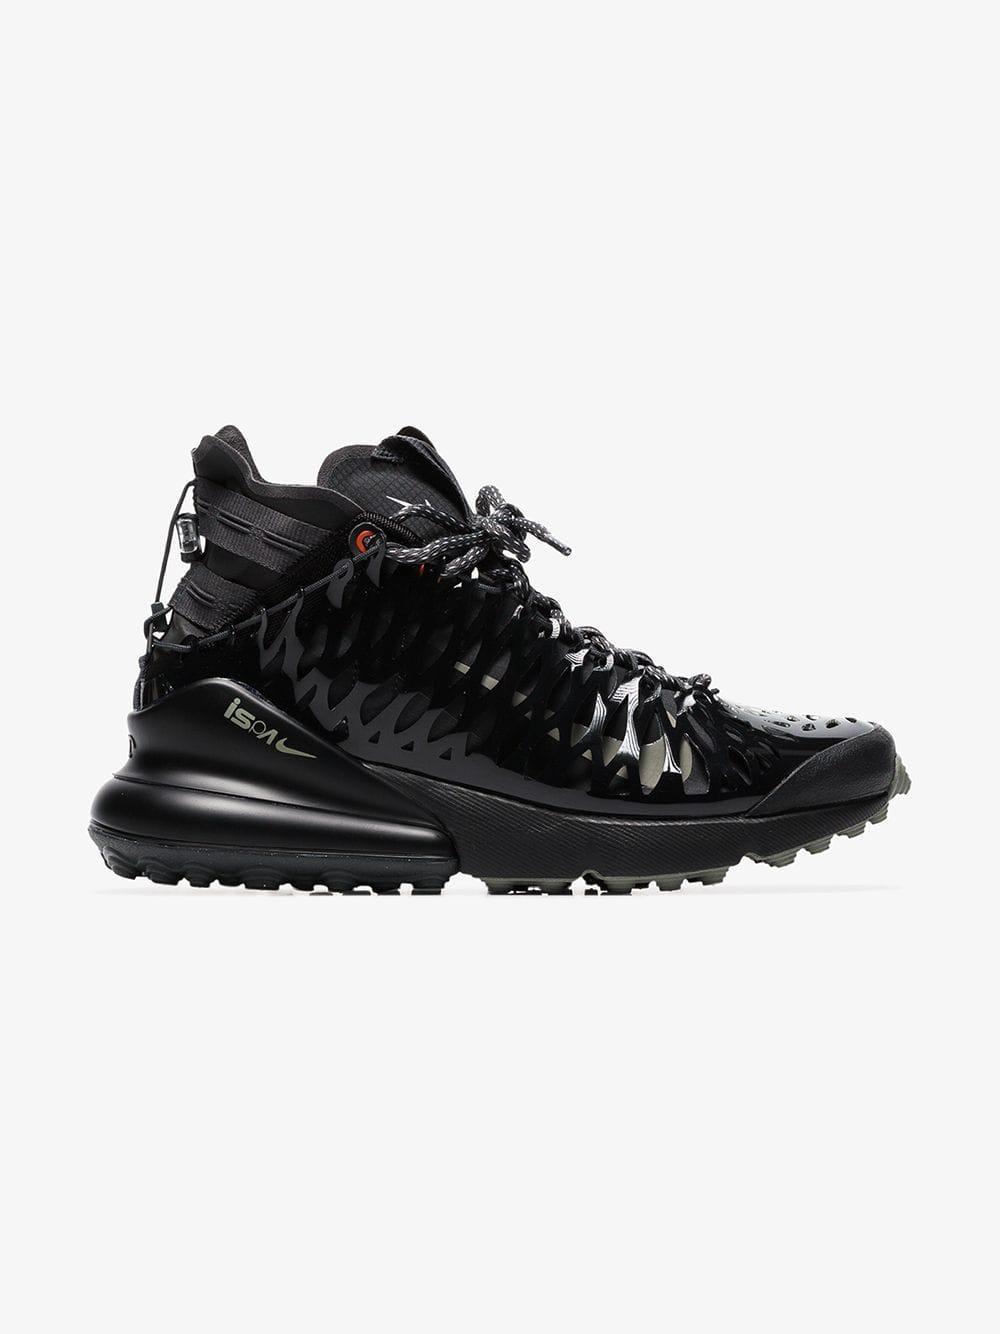 Nike Rubber Black Ispa Air Max 270 High Top Sneakers for Men - Lyst